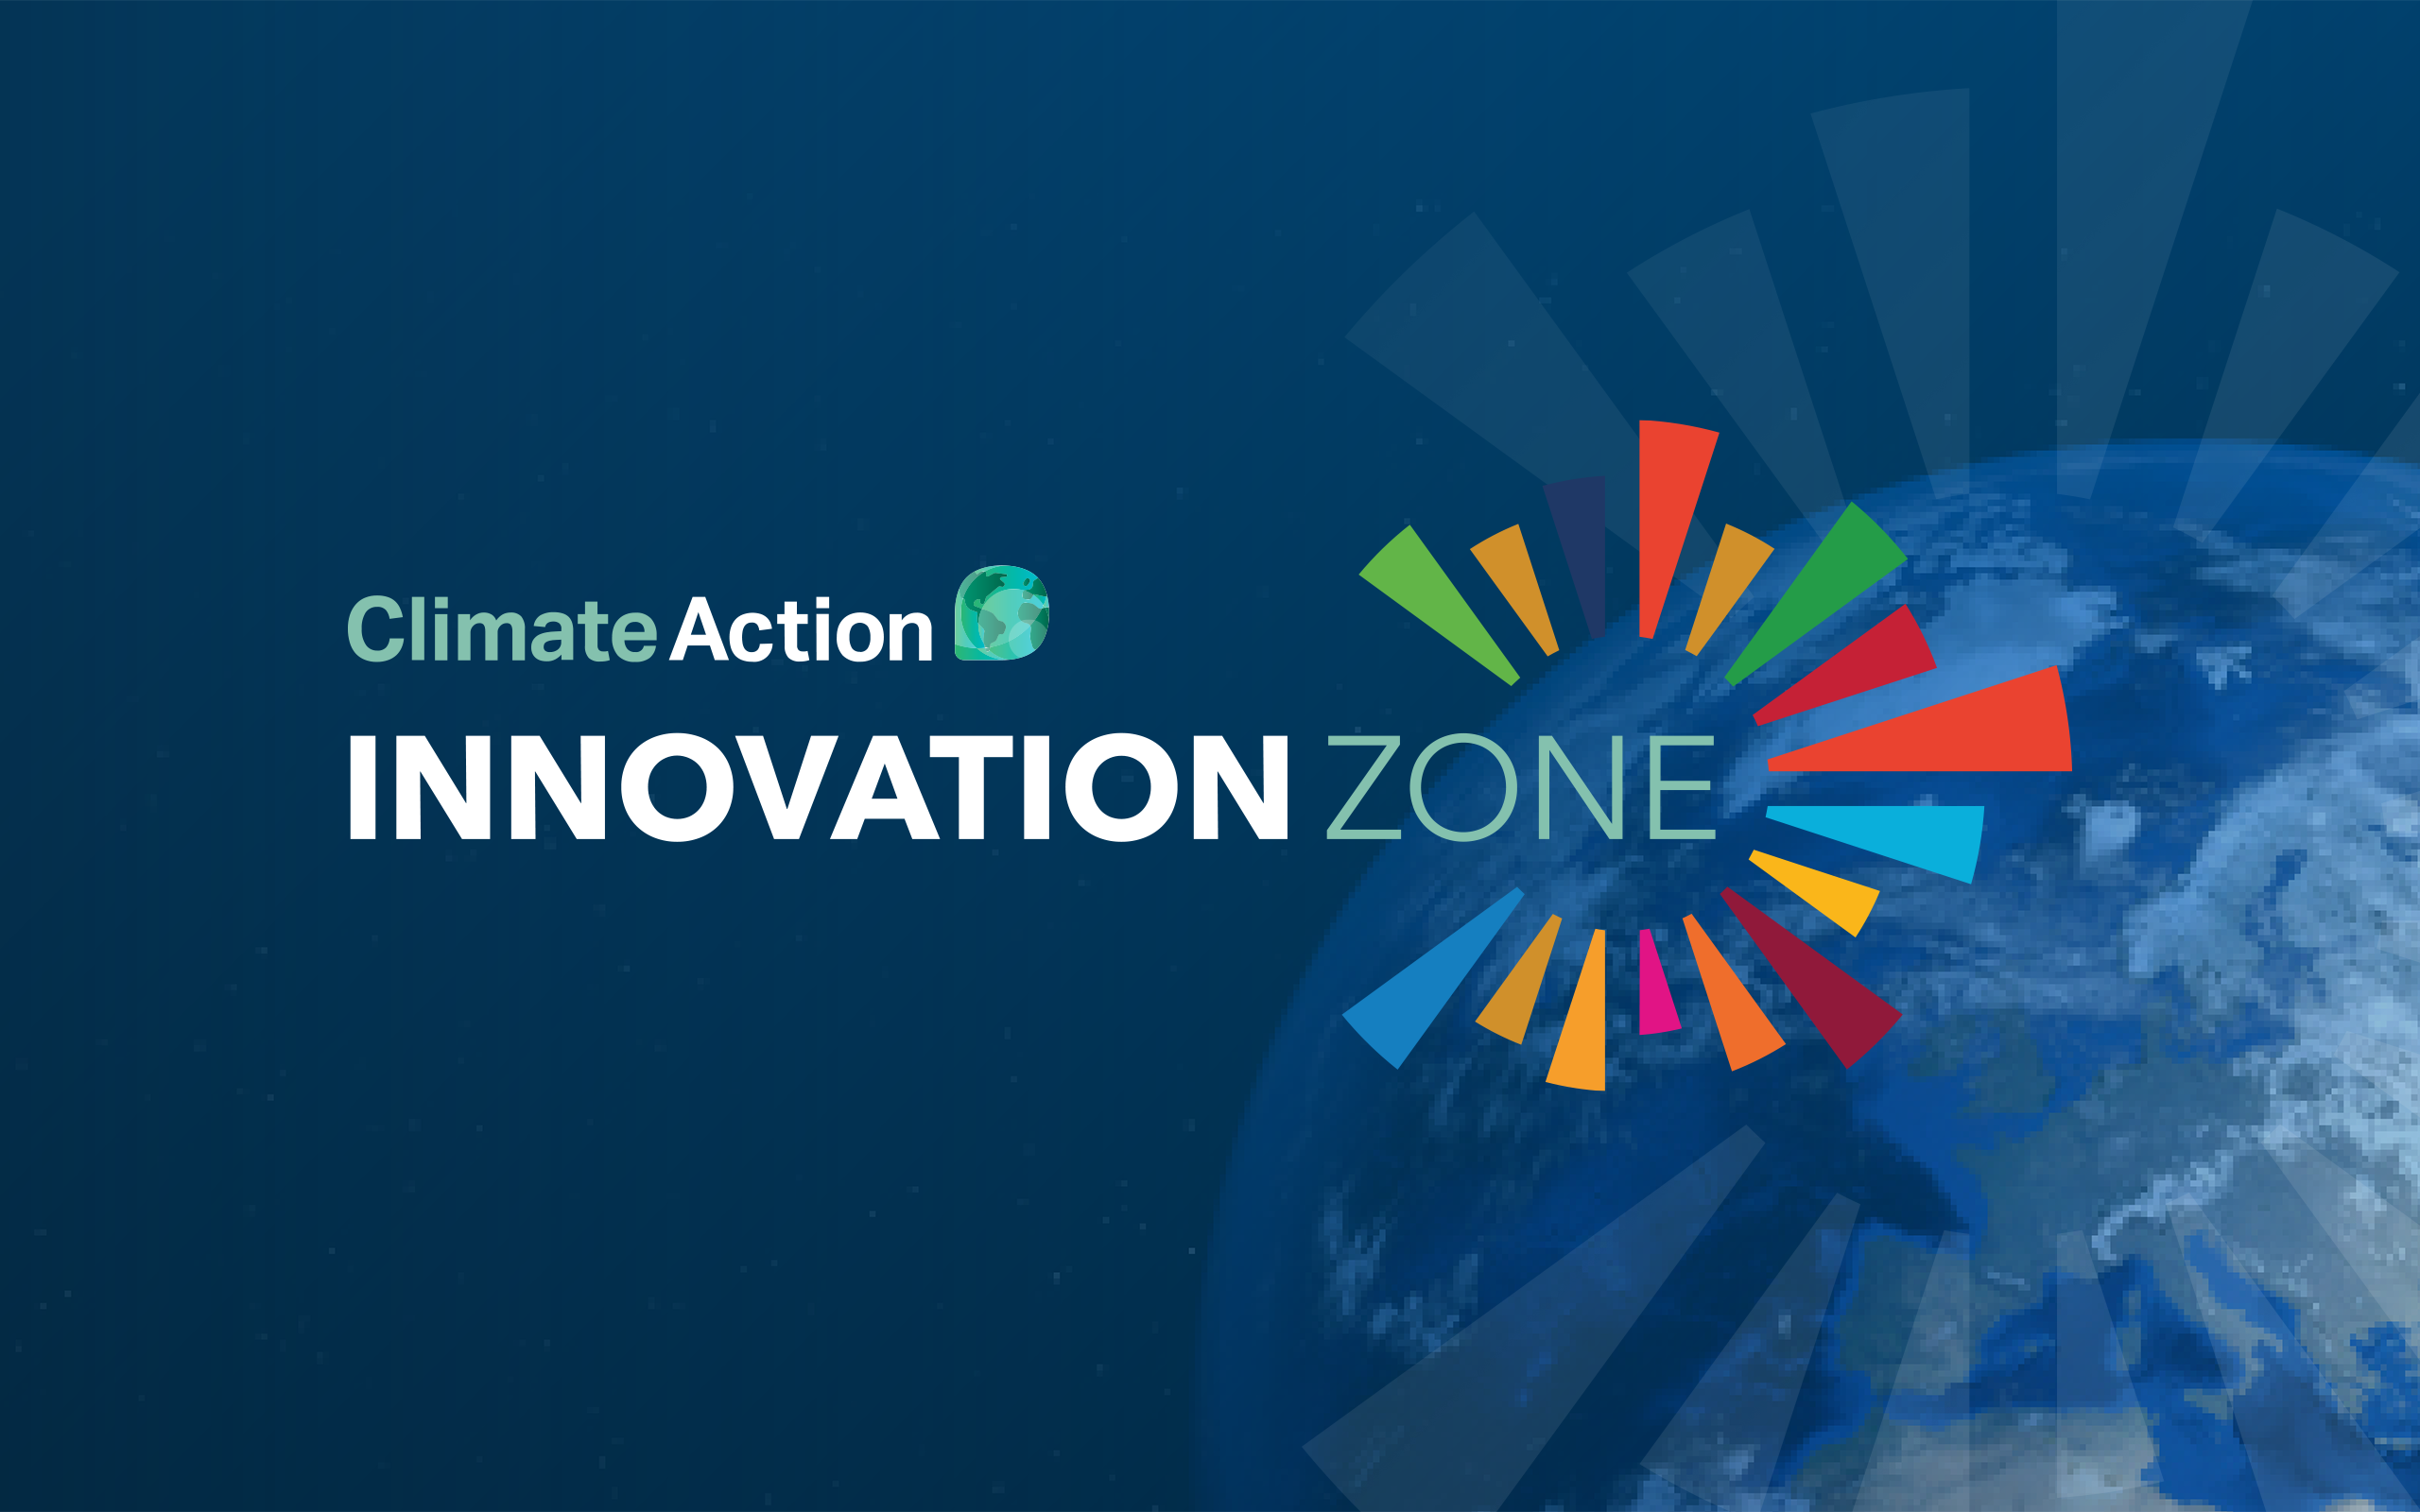 Climate Action Innovation Zone